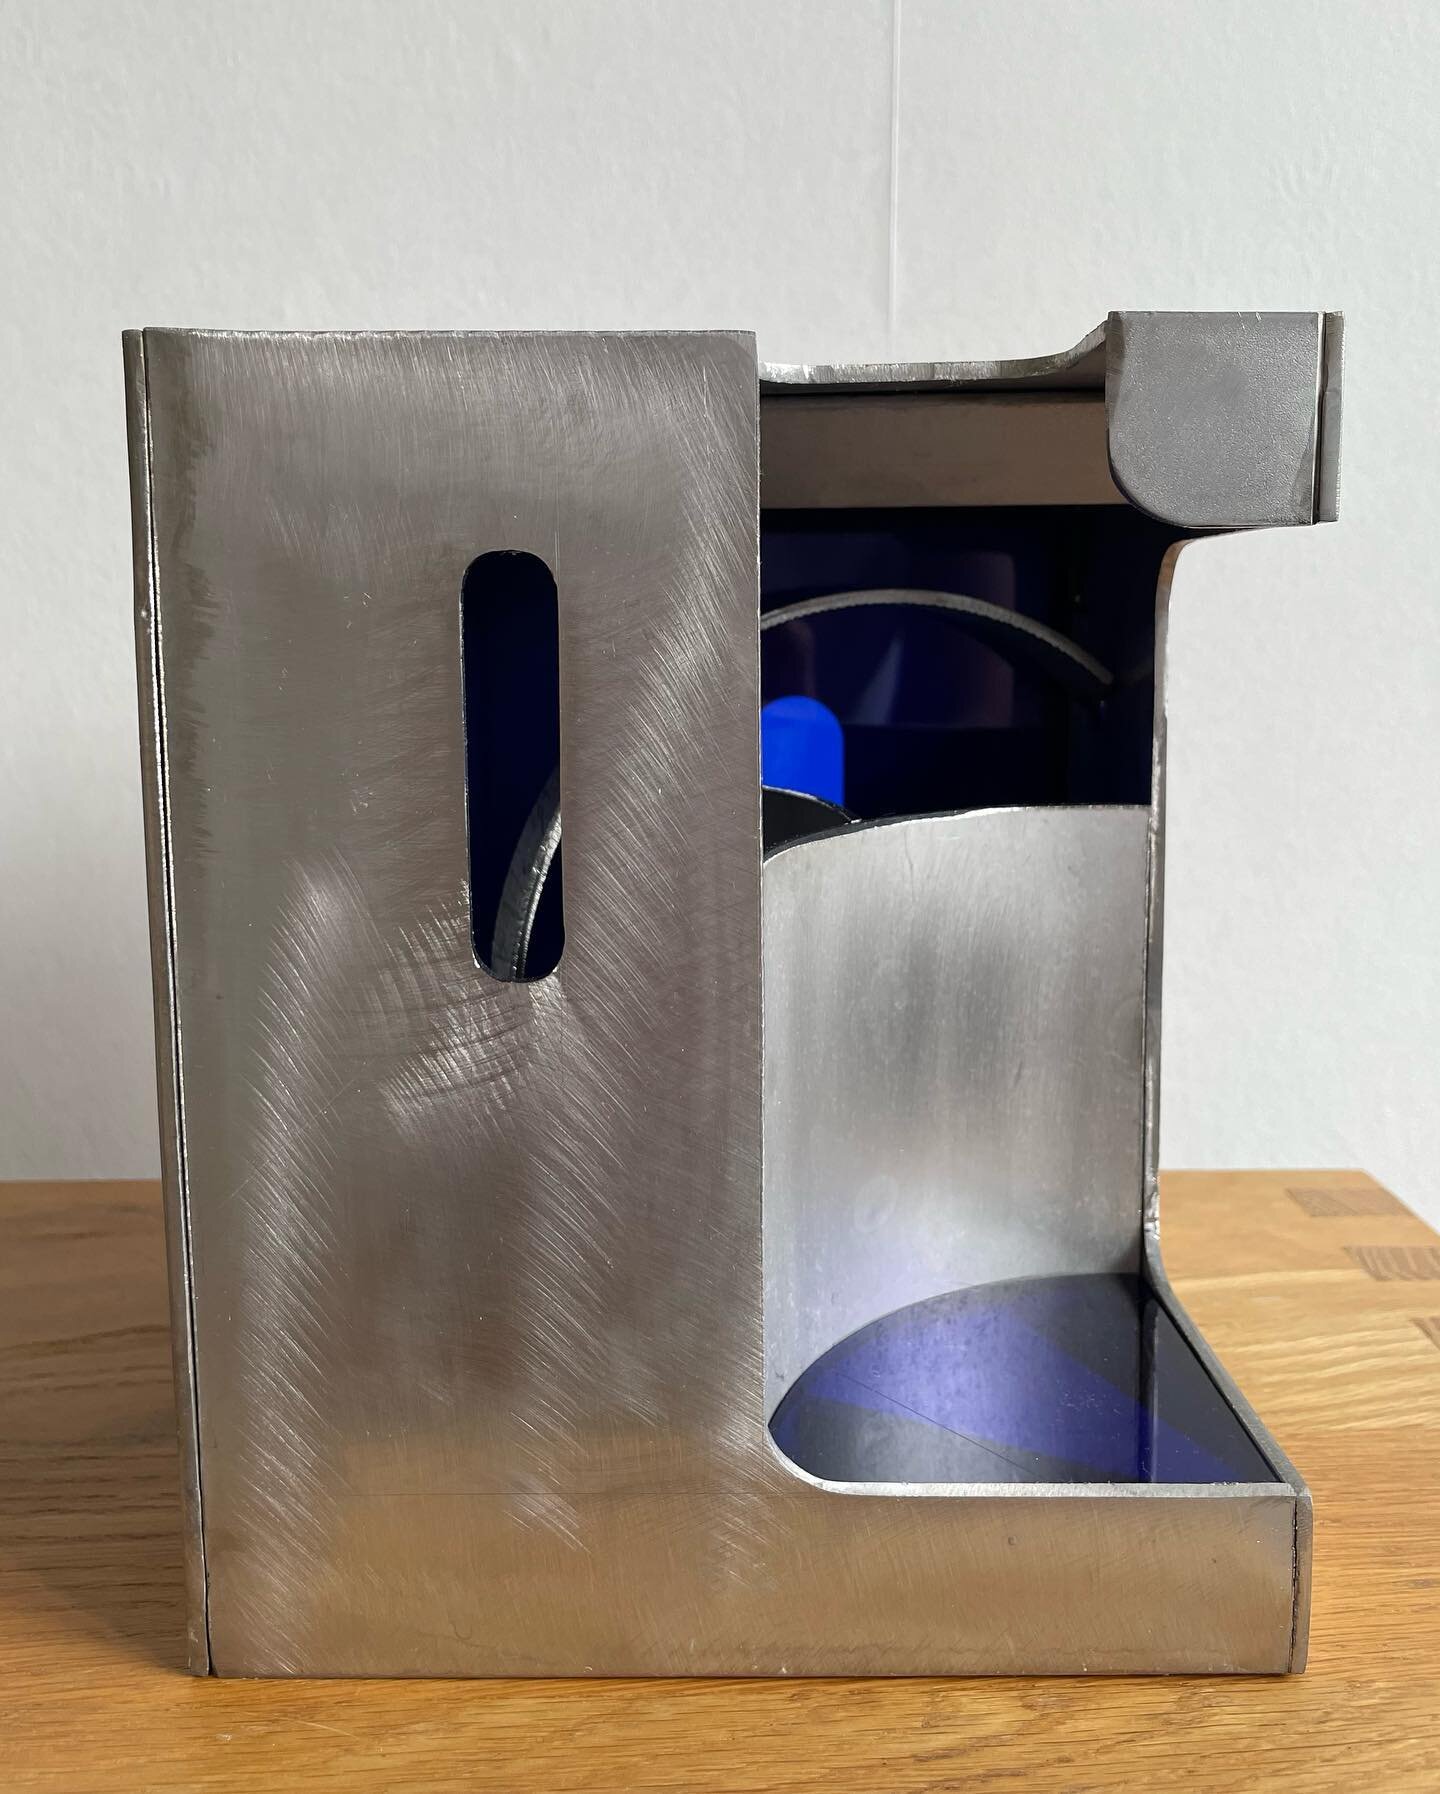 New work, &lsquo;Unsquare Dance&rsquo; stainless steel, blue acrylic. #sculpture #contemporarysculpture #blue #interior #space